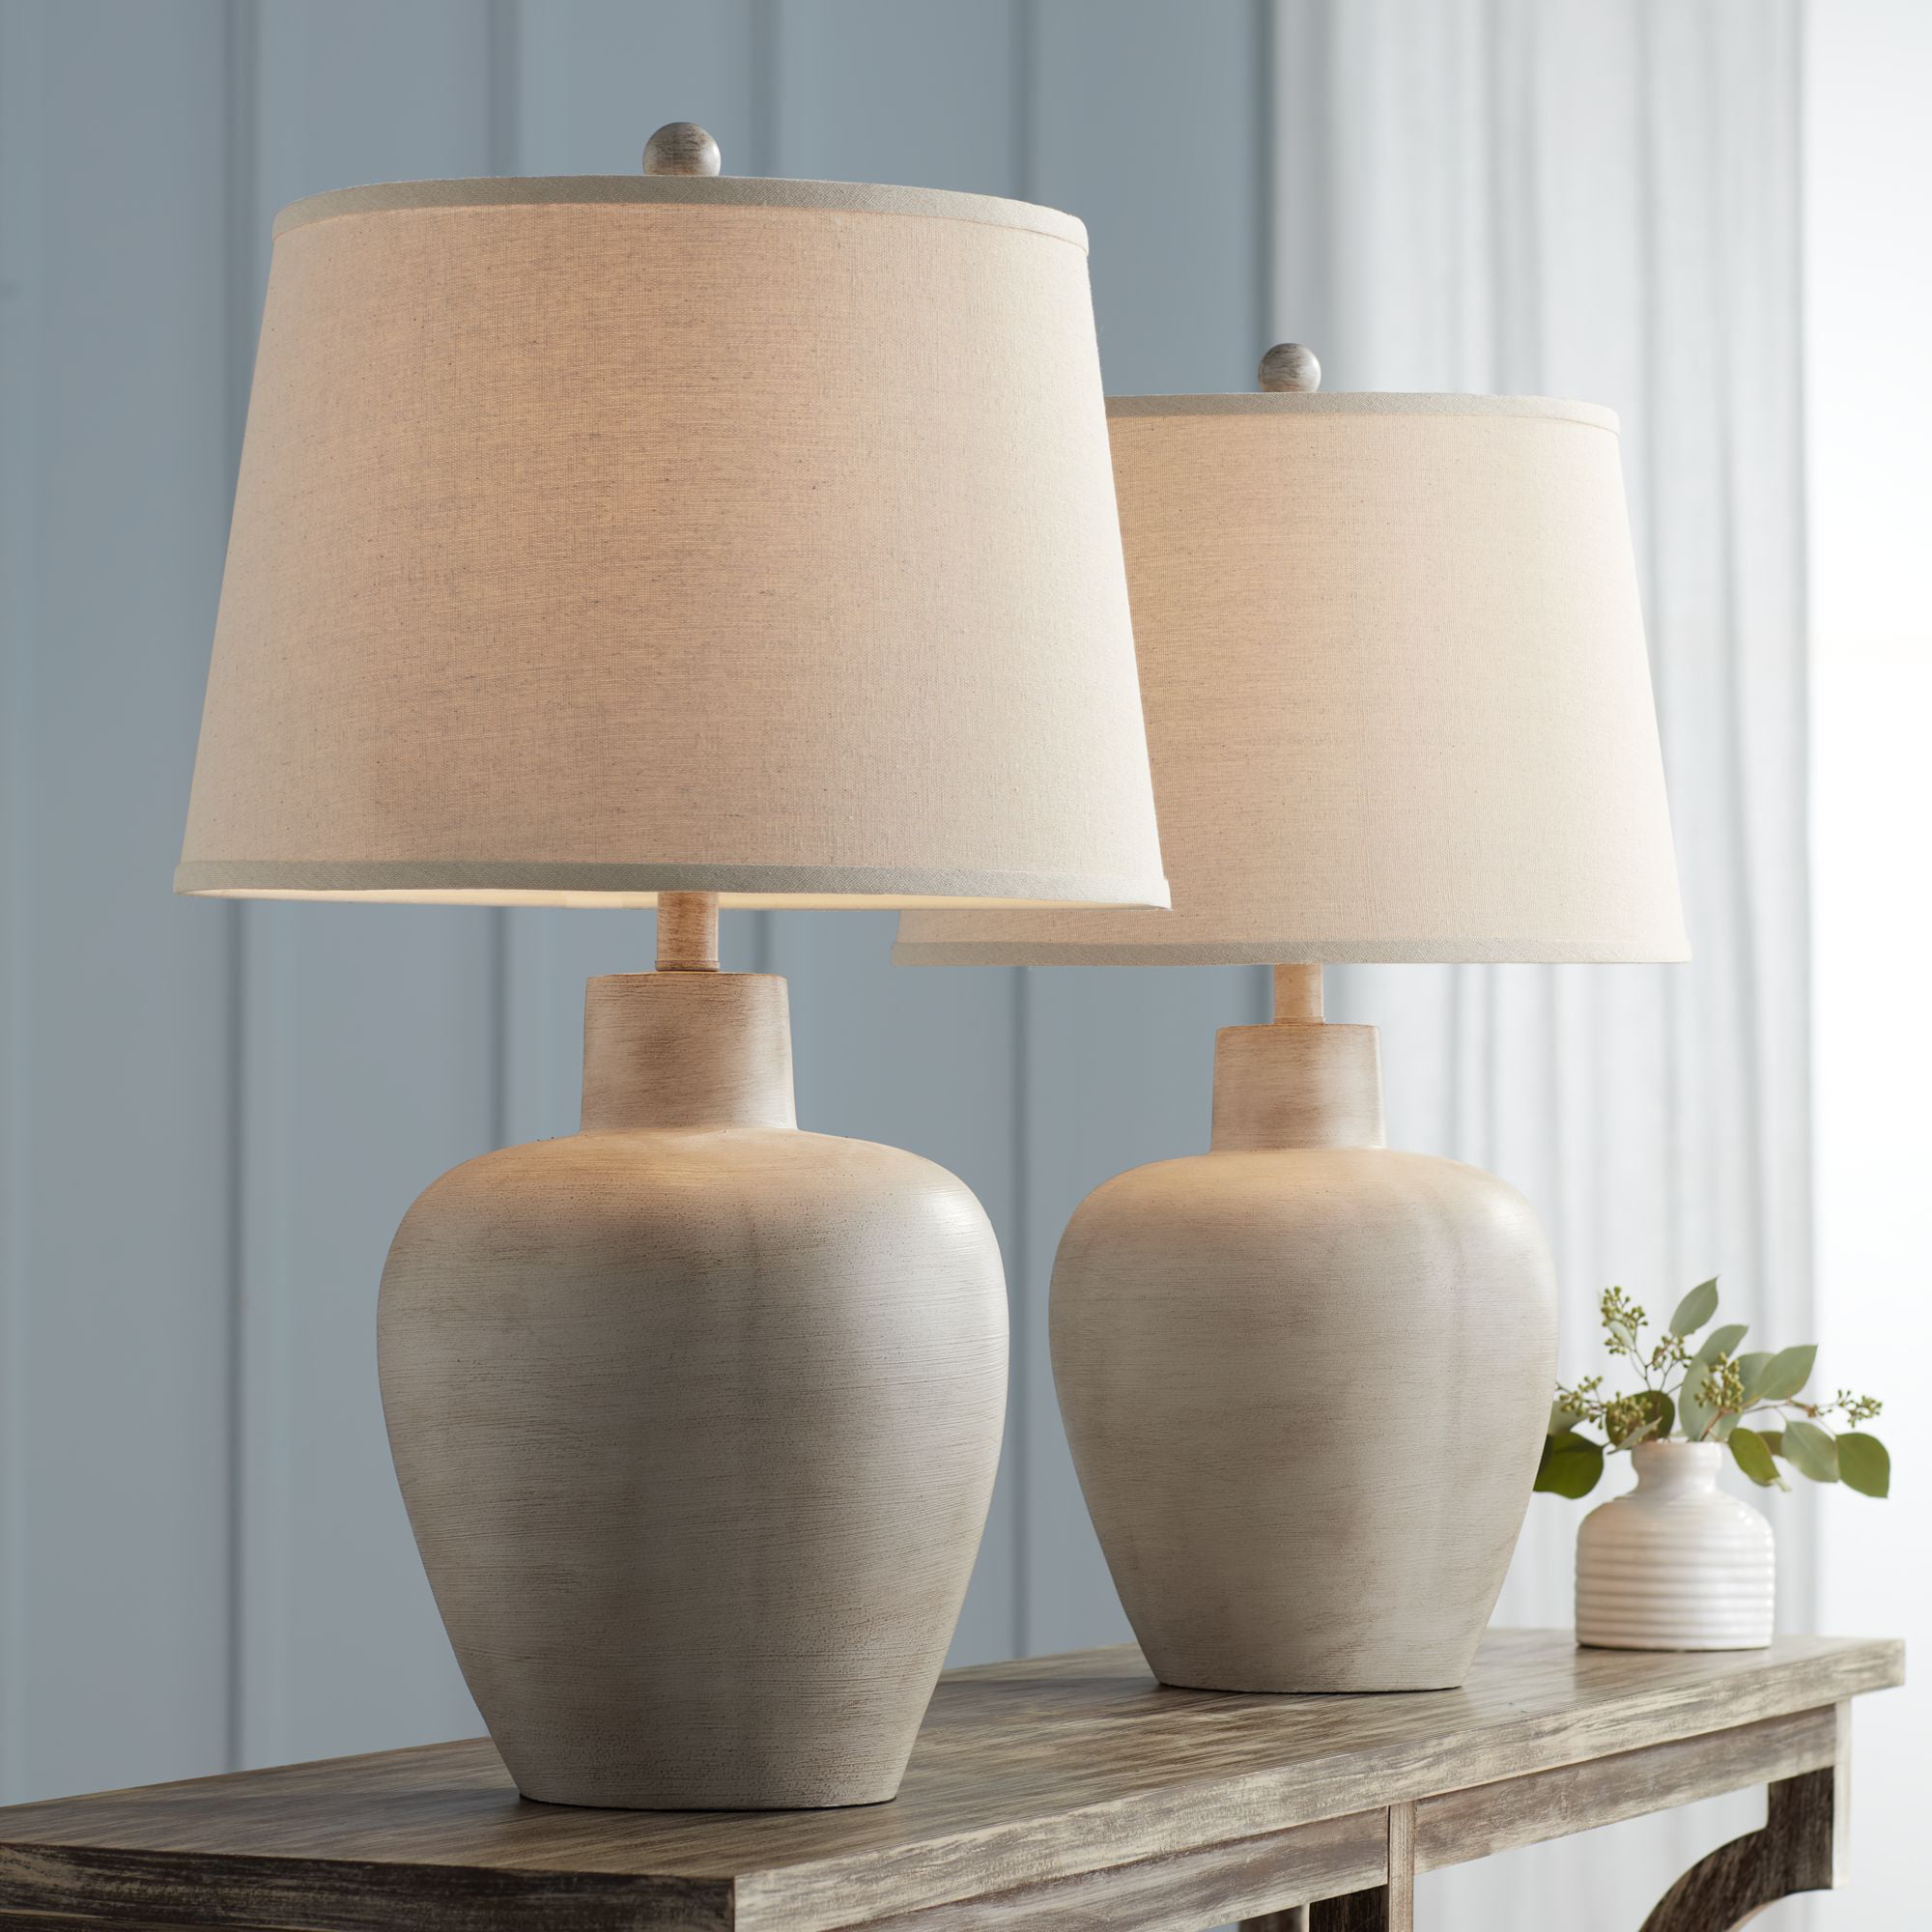 Table Lamp 27 in Ceramic Bedside Light Espresso Silver Linen Shade 3-Way Switch 